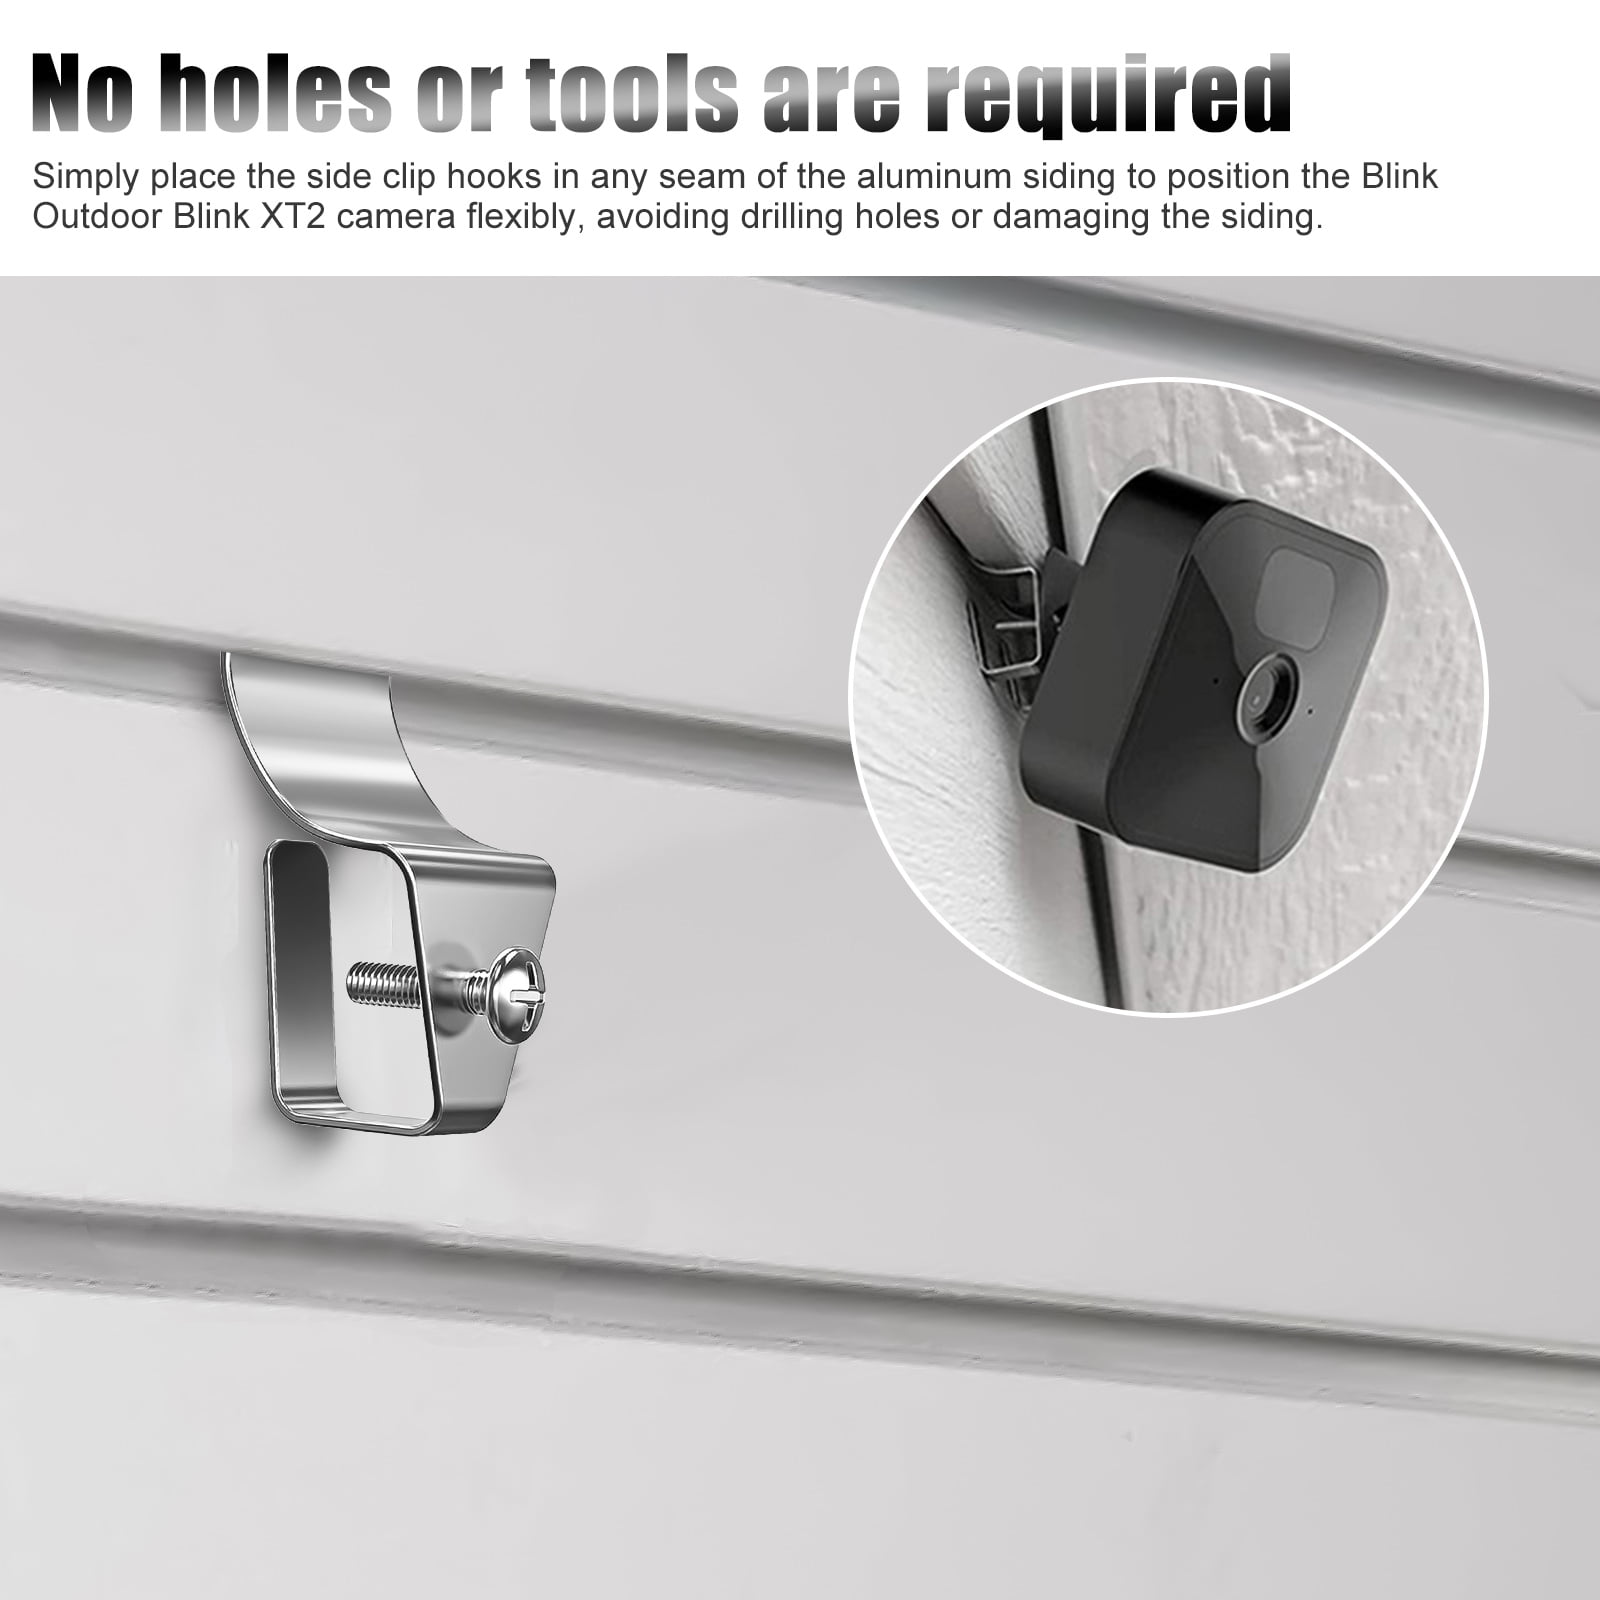 Hooks Hook Outdoor Light Hangers Security Camera Clips Siding No Nails  Decoration Stainless Steel Drilling Needed No Hole From 9,21 €